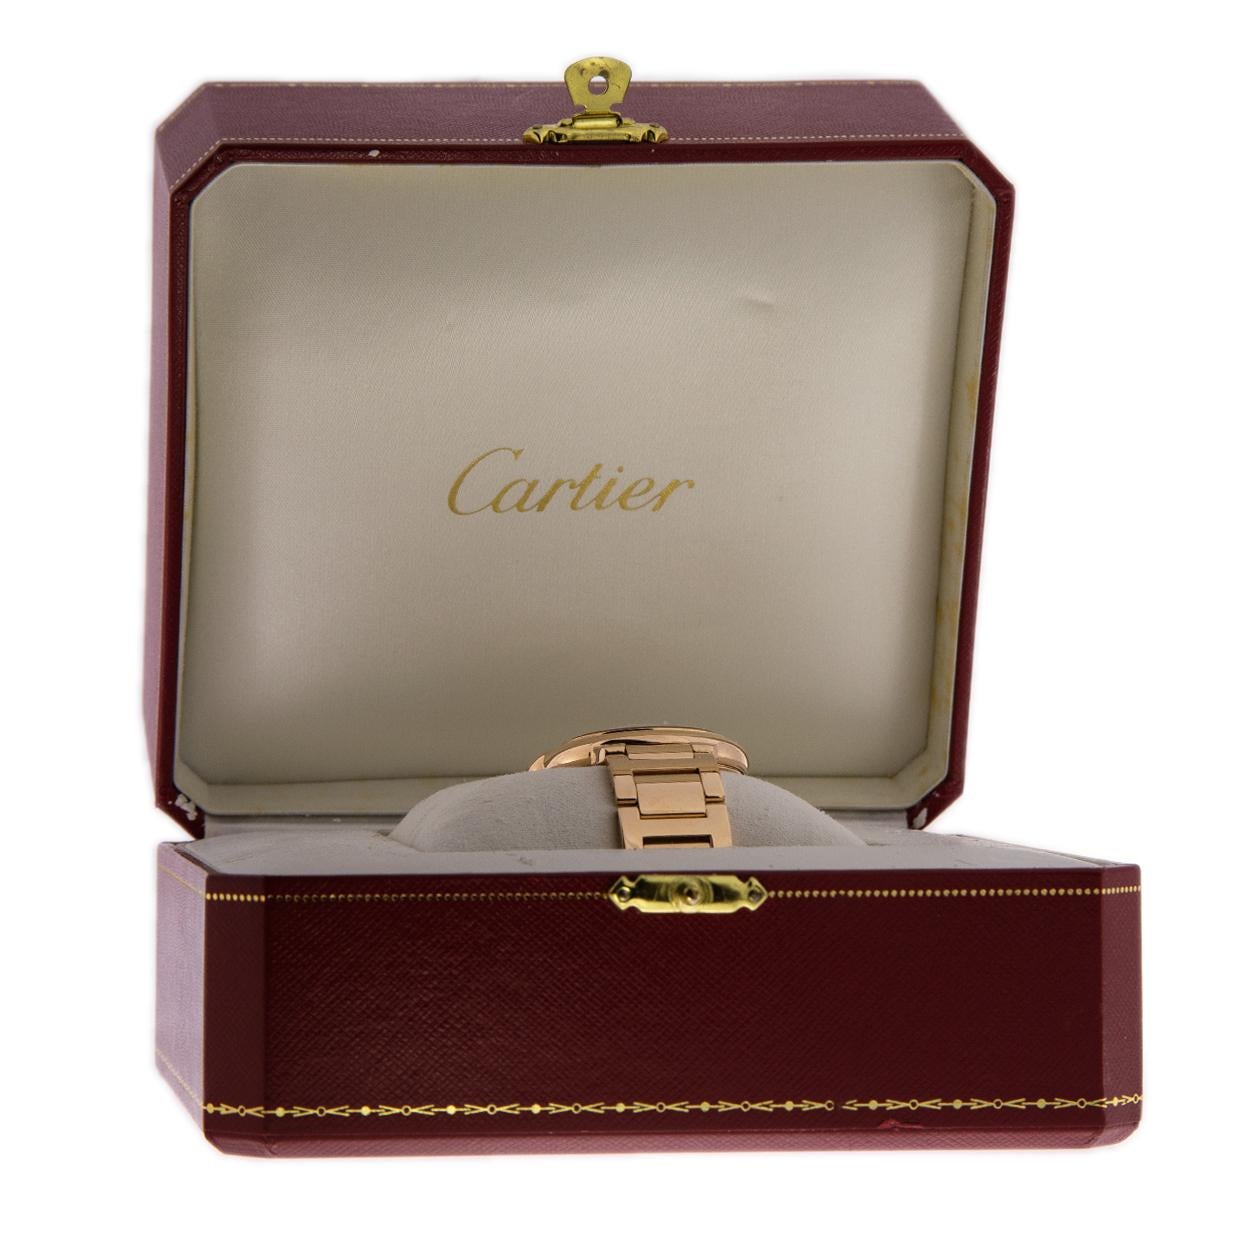 Item Details

Estimated Retail $28,700.00
Brand Cartier
Collection Ballon Bleu
Case Material Rose Gold
MPN W69004Z2
Movement Mechanical Automatic
Face Color White
Band Type Bracelet
Case Size 36 mm
Style Dress
Cert/Paperwork Box & Papers

Founded in